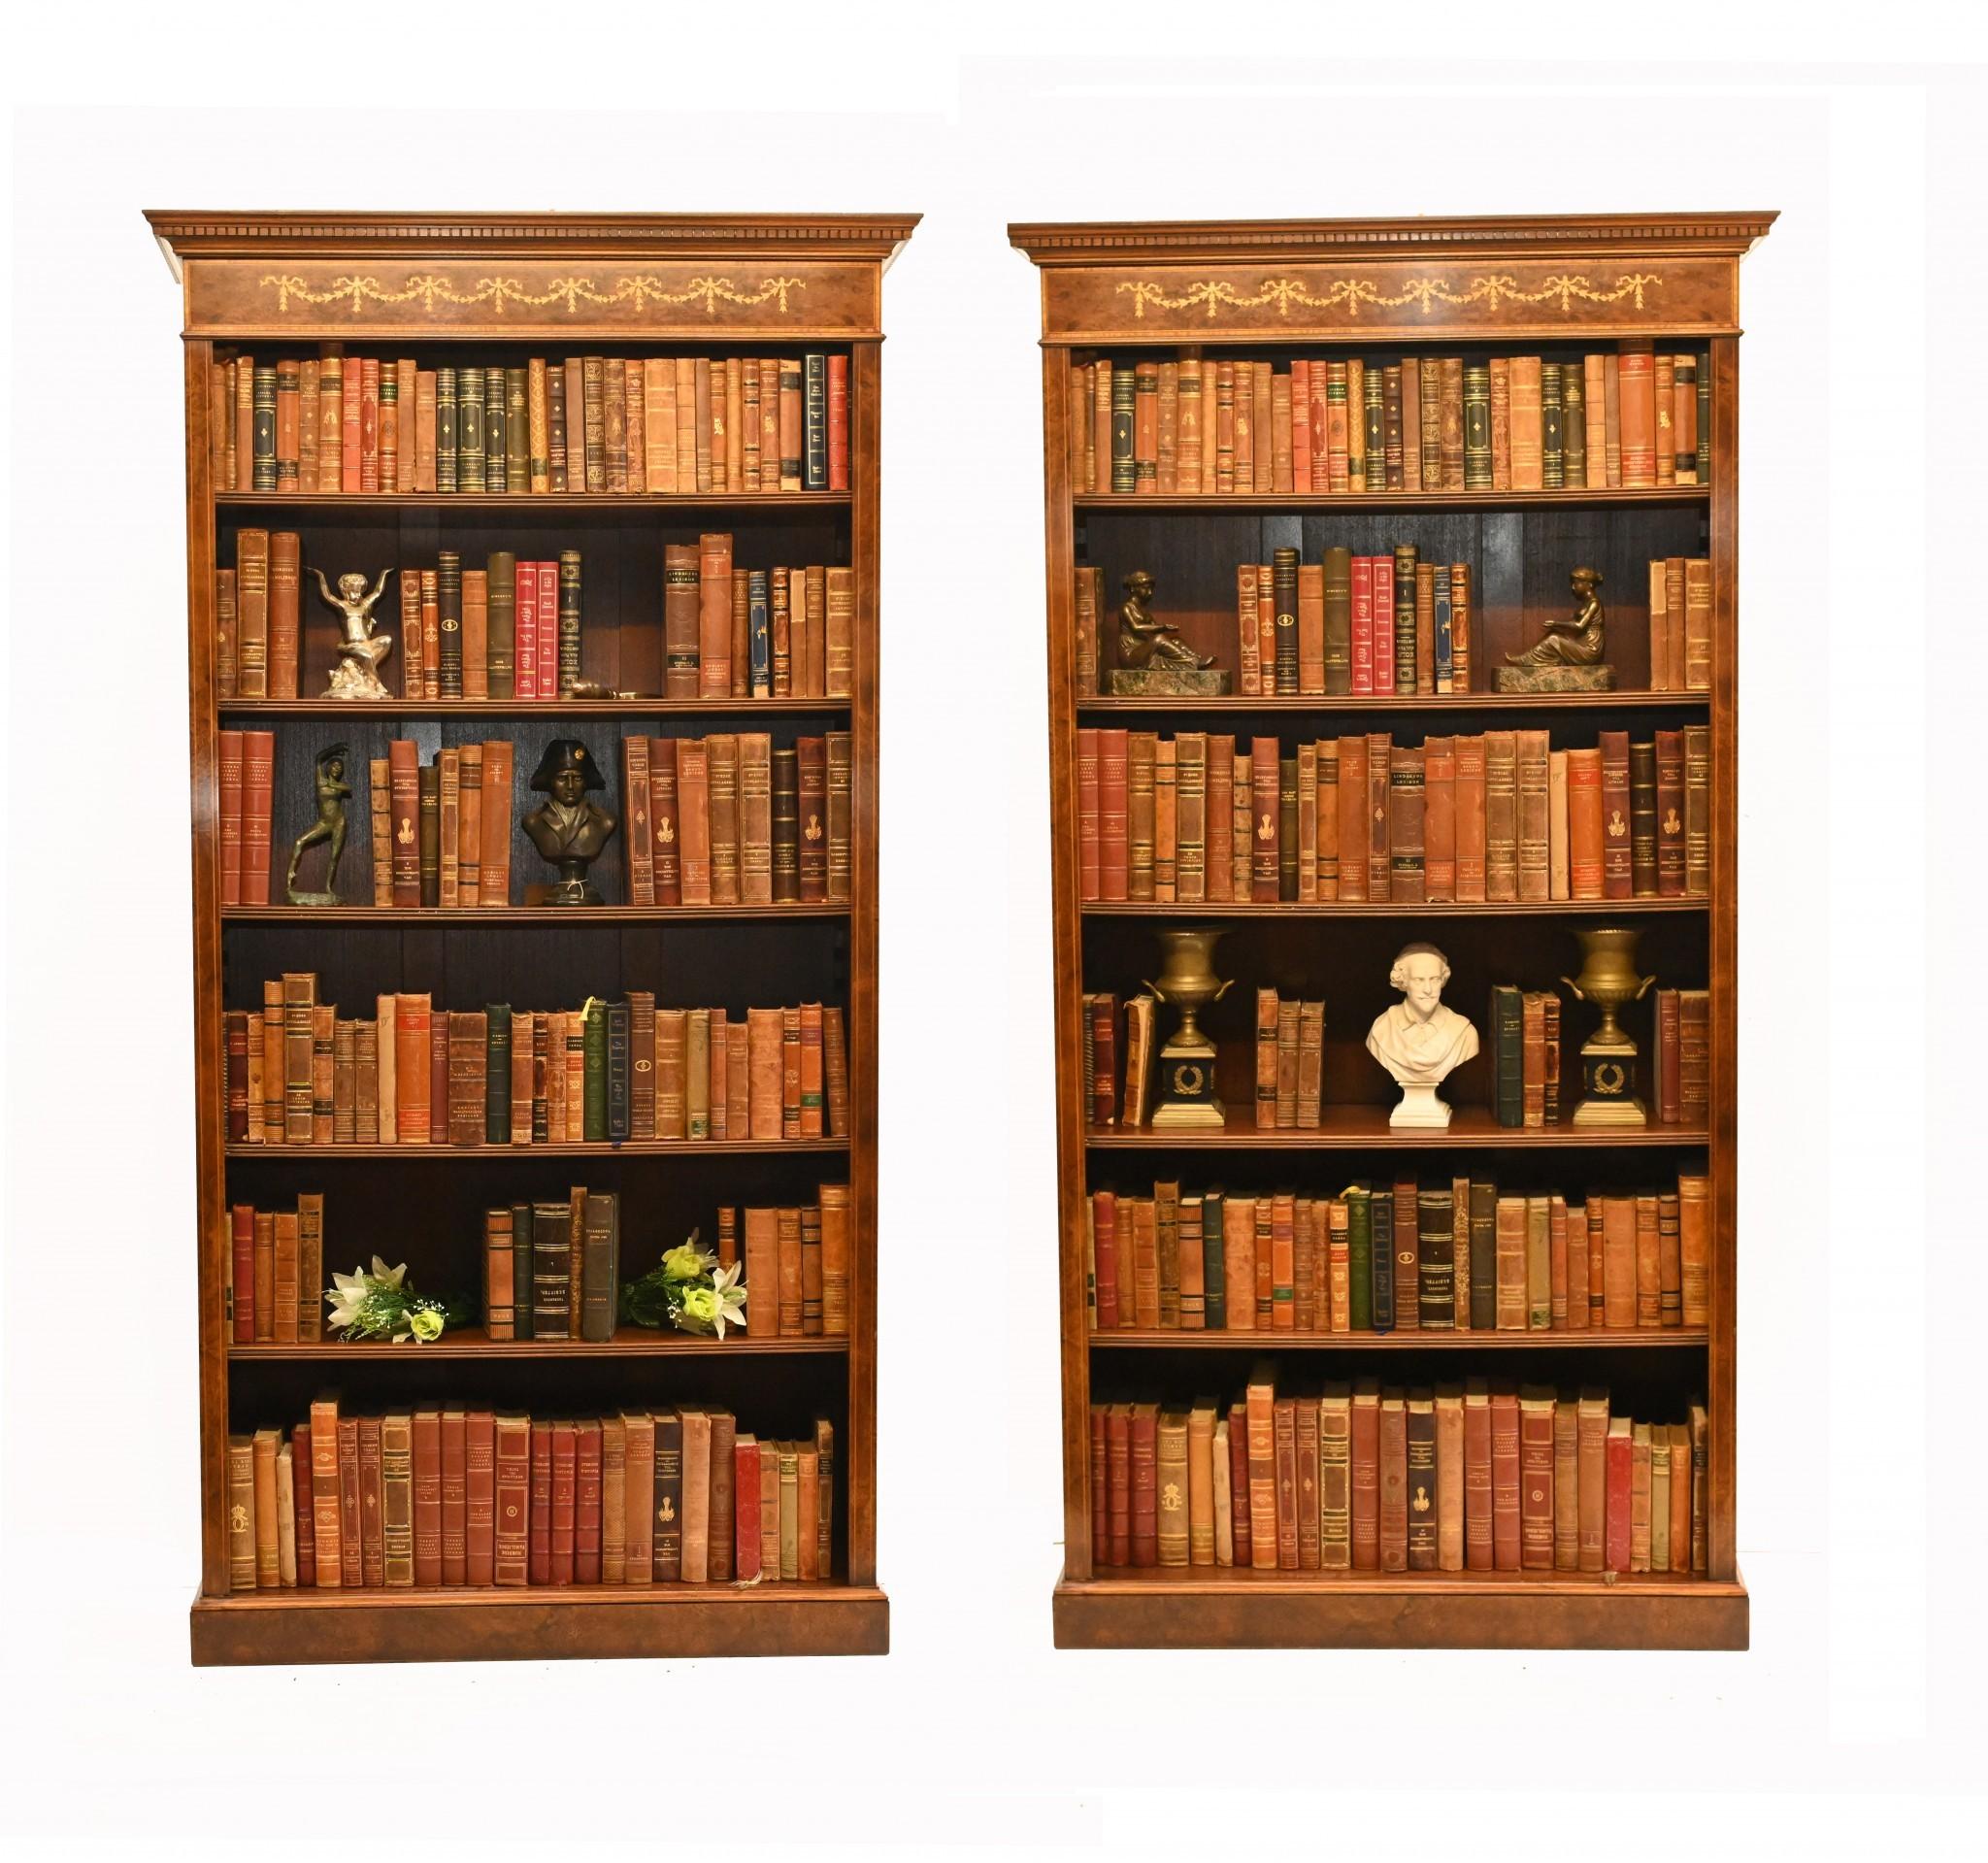 You are looking at a pair of English Sheraton style openfront bookcases hand crafted from the finest walnut. This lovely pair are the perfect mix of decorative beauty and practical functionality to make for a vintage design classic. They look great